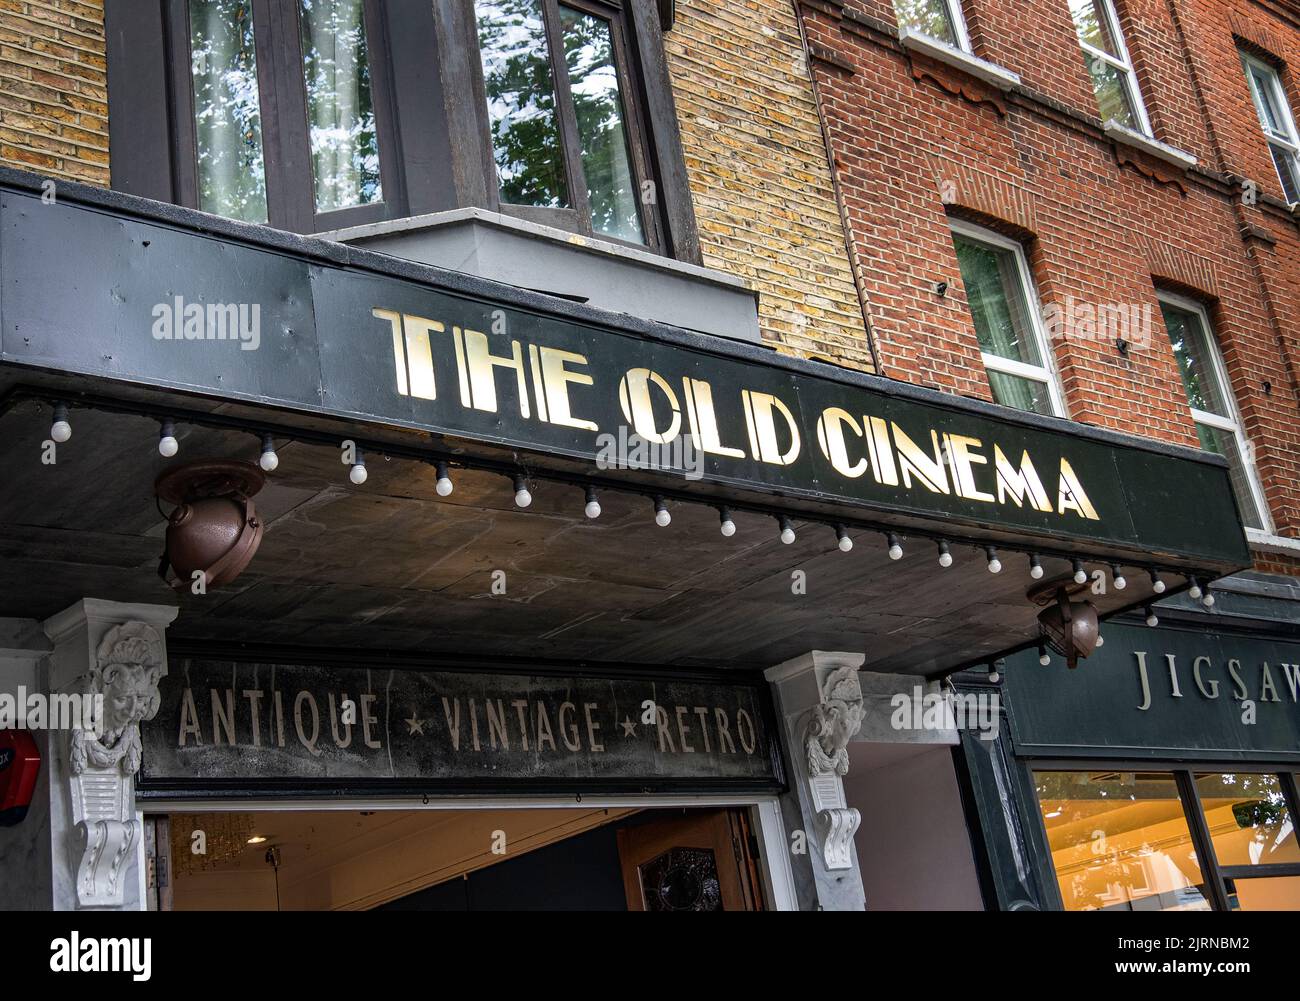 The Old Cinema, originally a picture house, but is now an antique market in Chiswick high street. Stock Photo